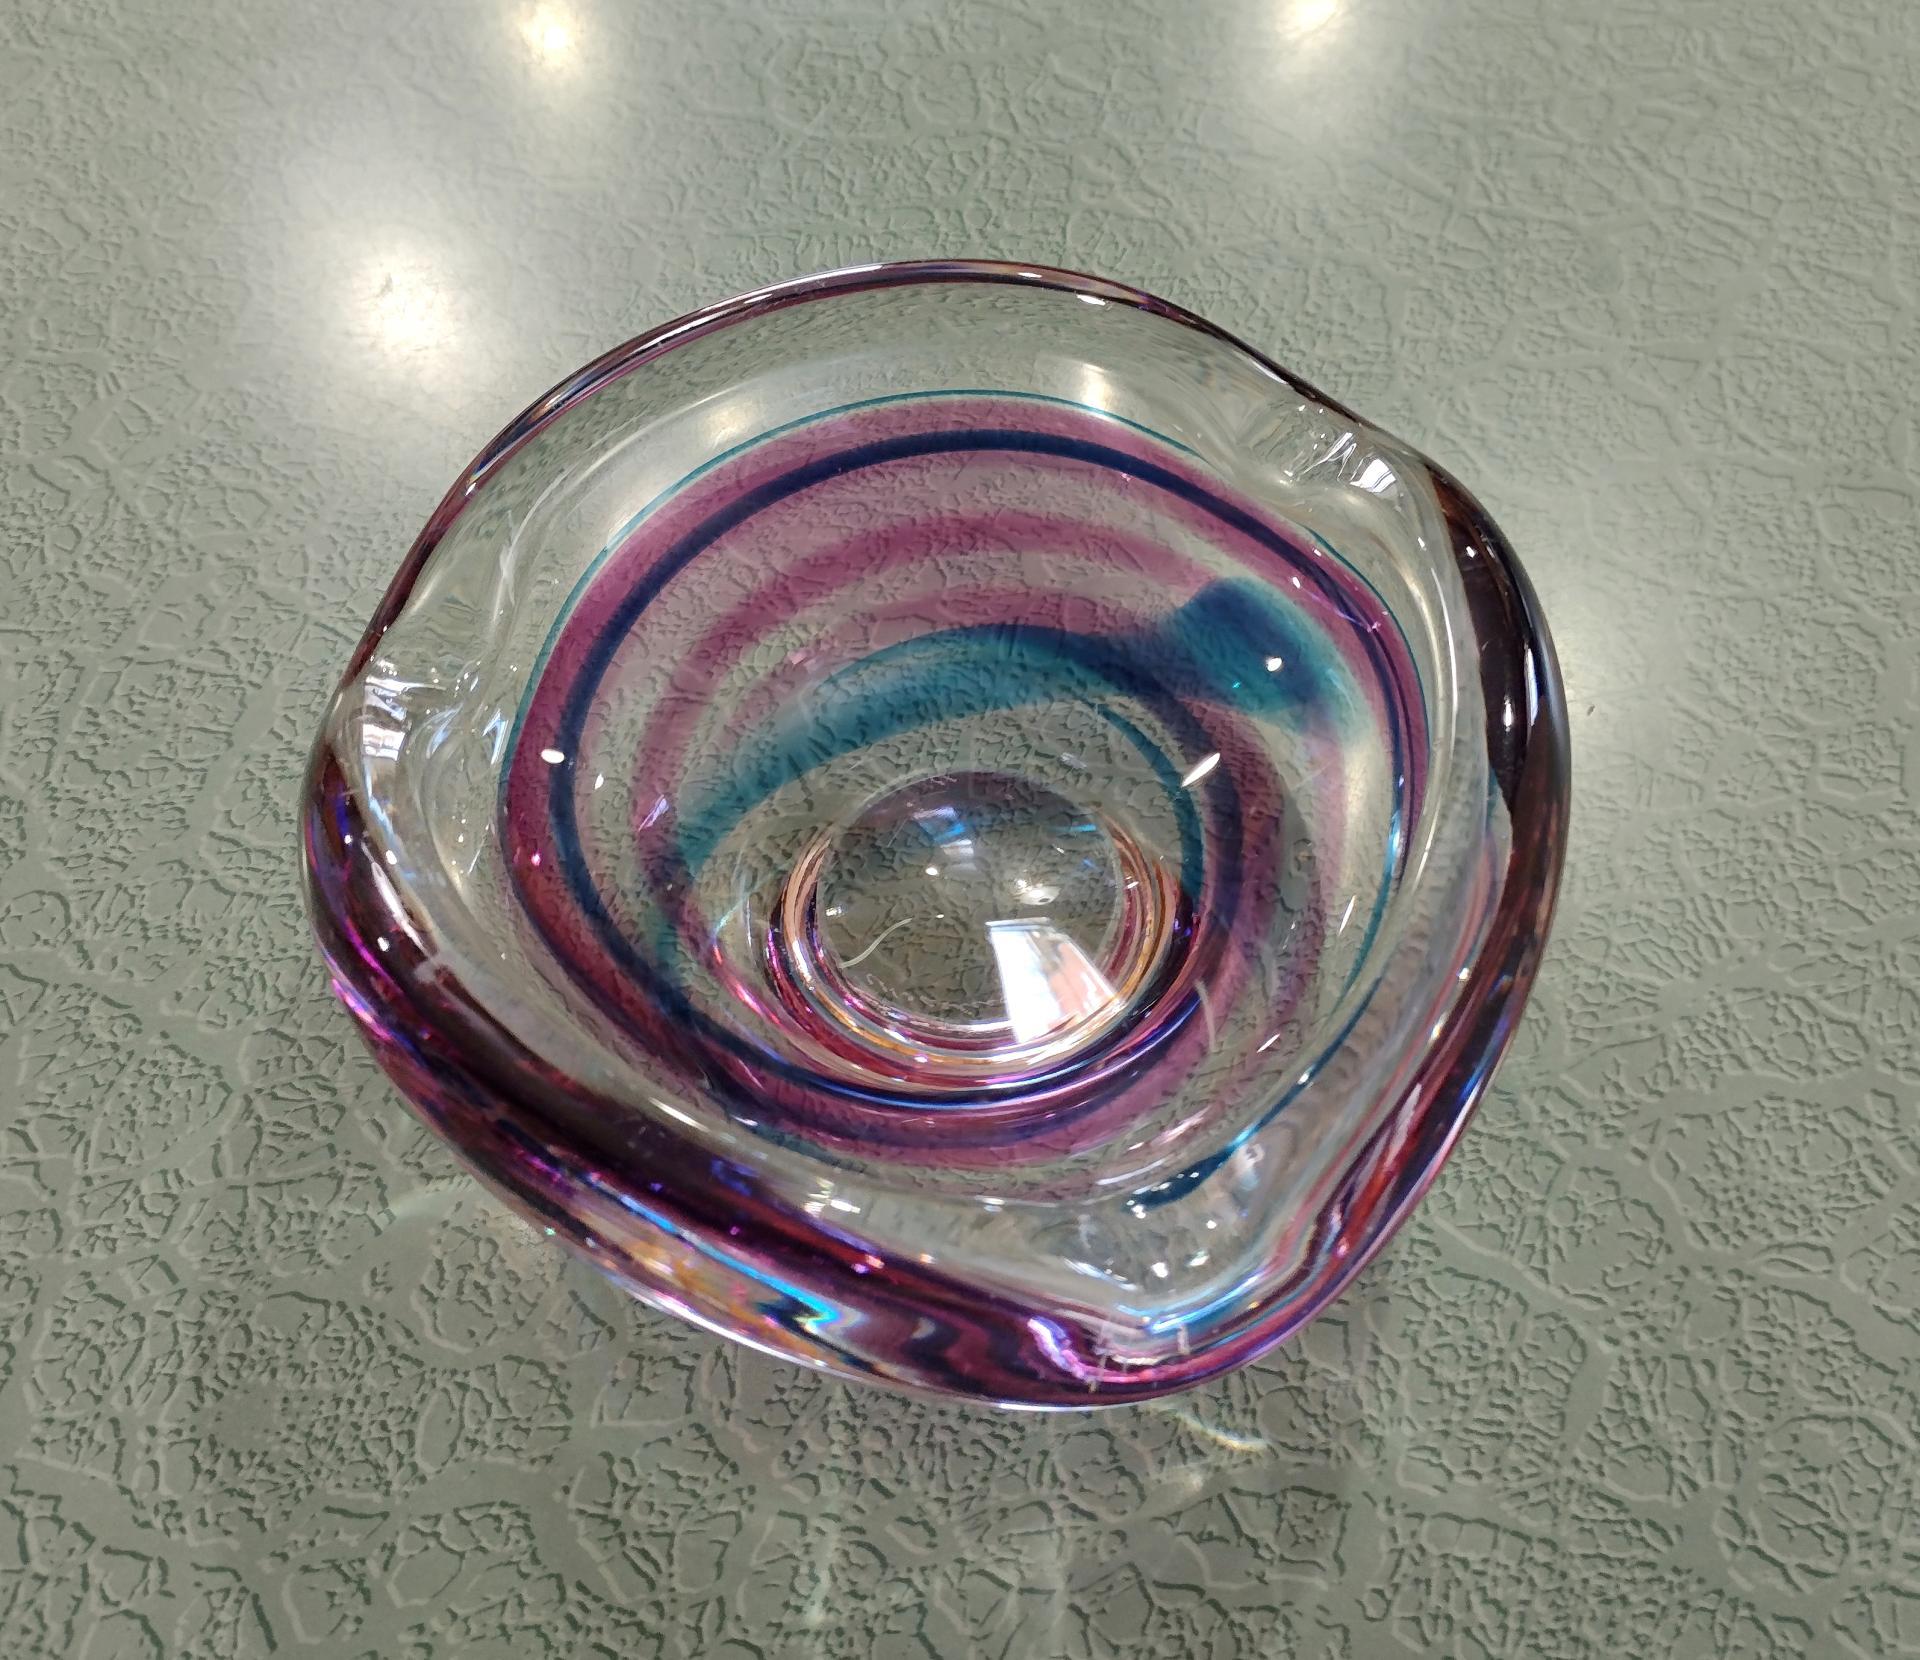 Vintage Signed Maastricht Blown Glass Ash Tray, Blue and Pink Bowl, Midcentury Modern Art Glass